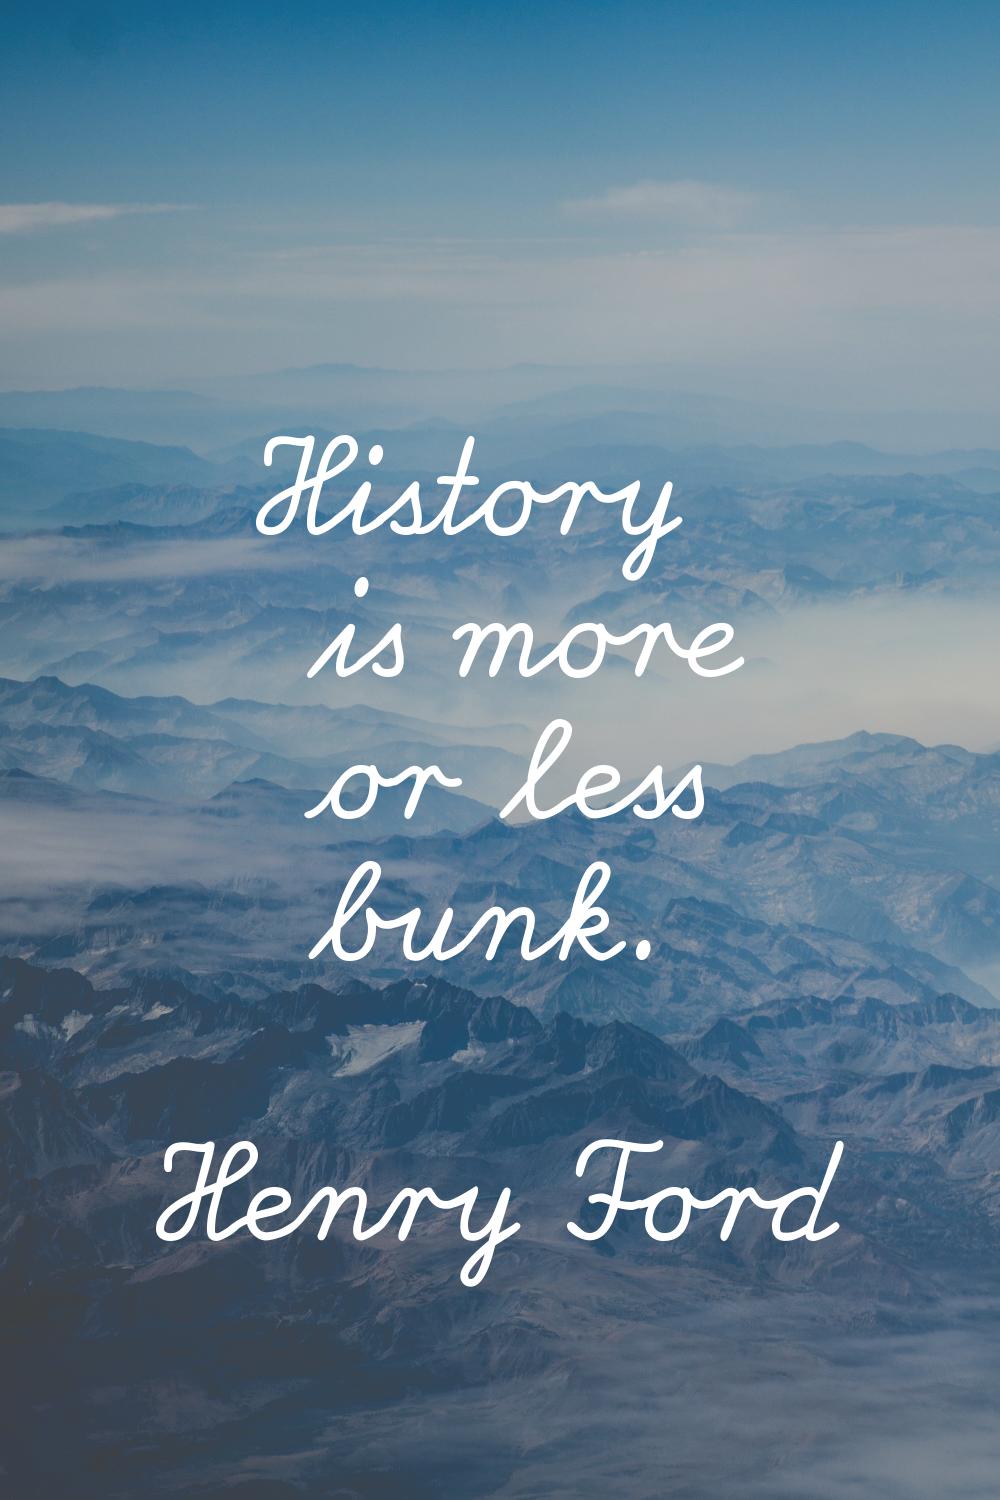 History is more or less bunk.